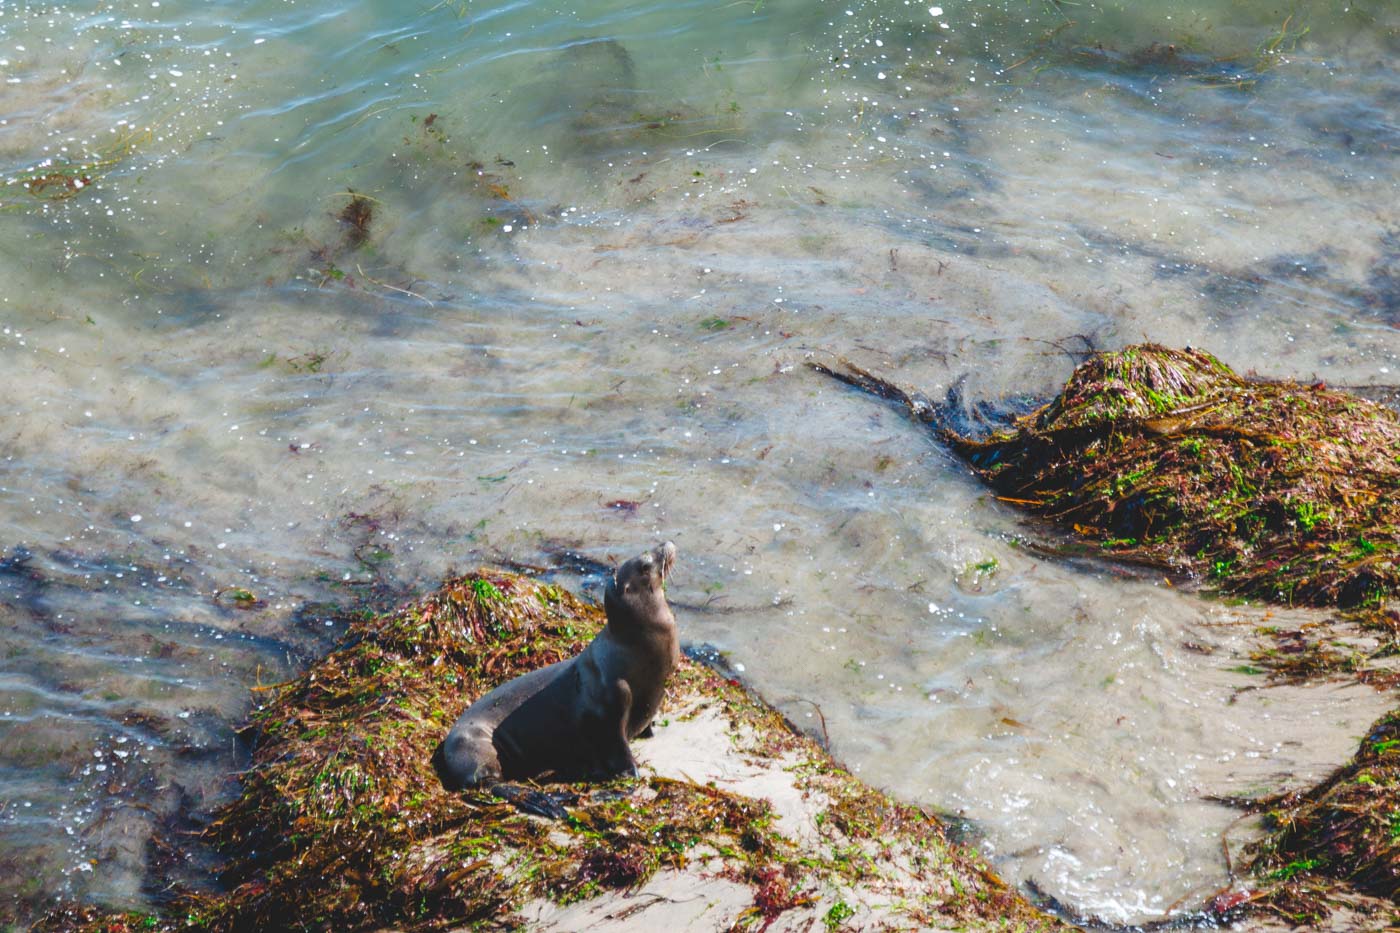 A sea lion basking in the sun at Pleasure Point.